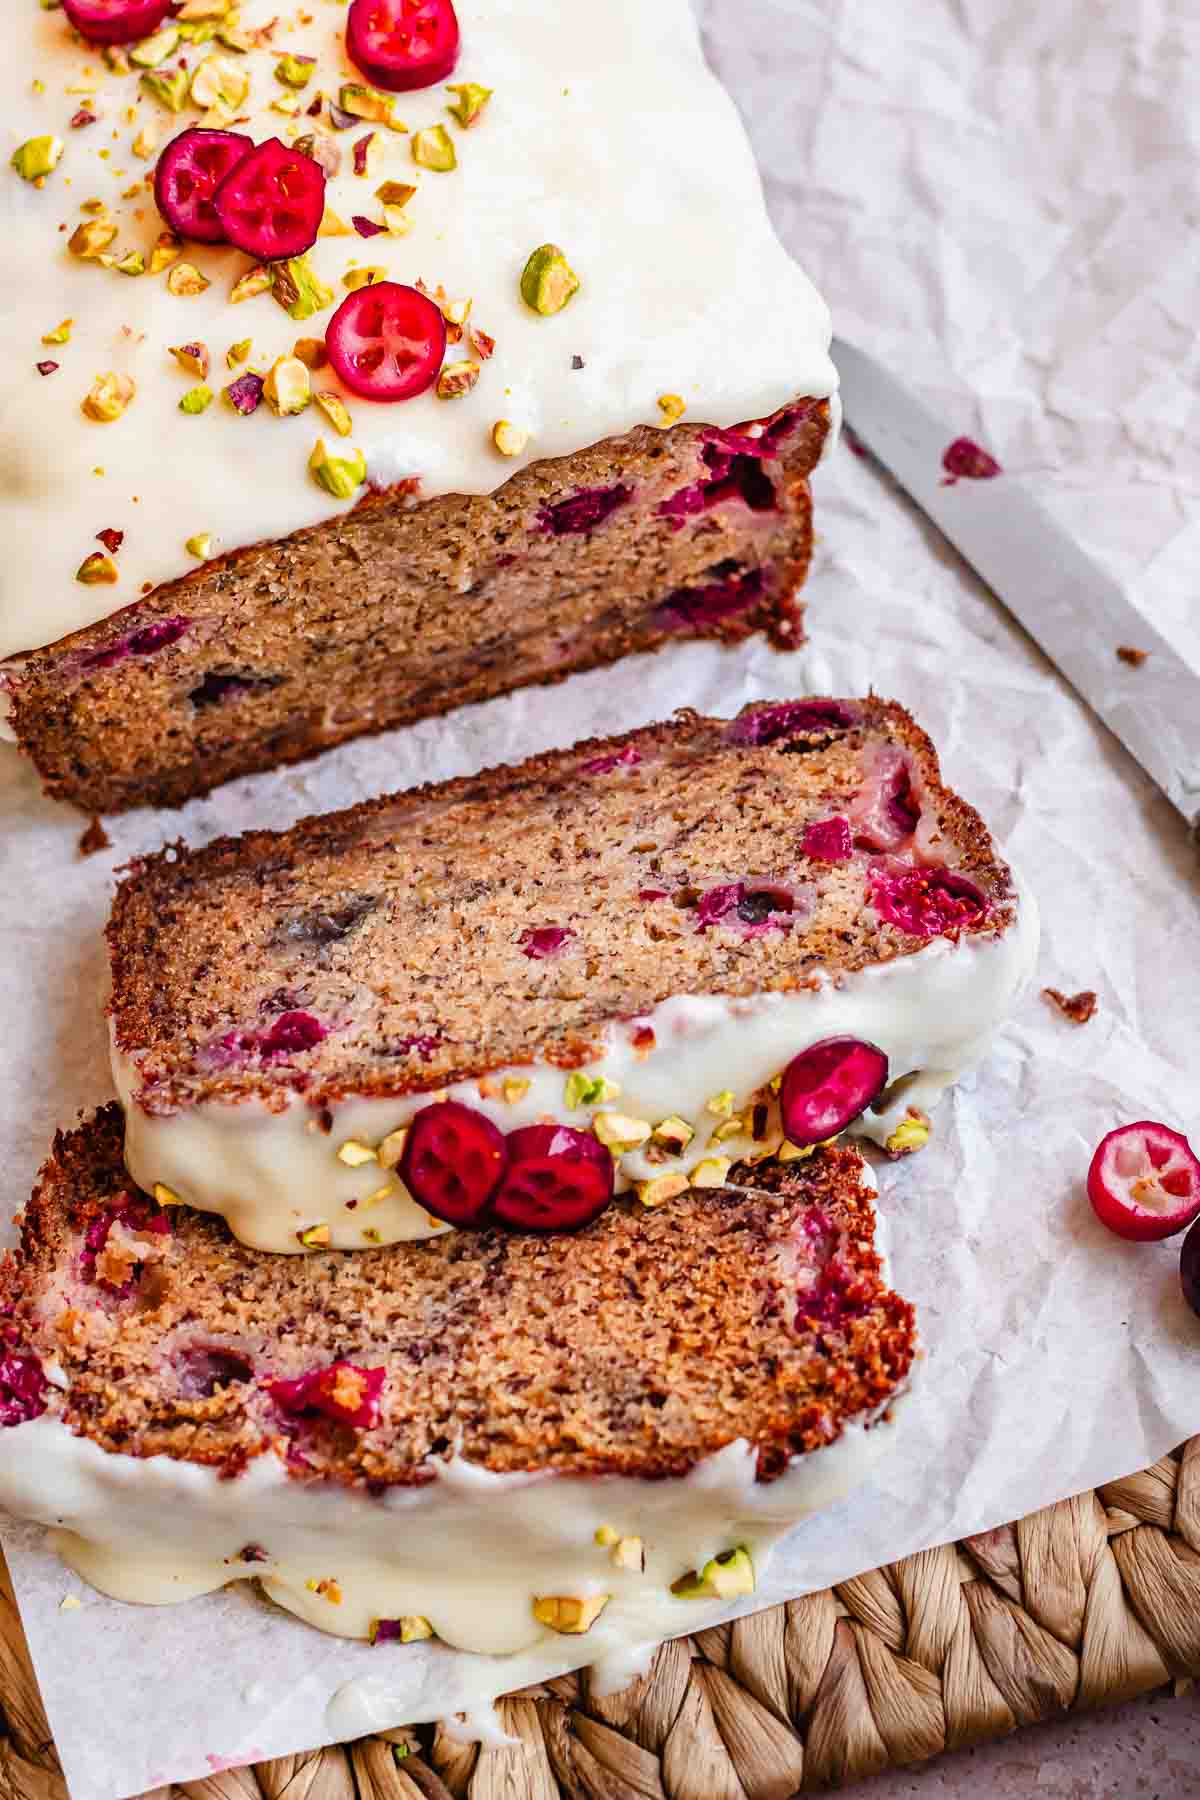 Cranberry banana bread sliced on a. cutting board.